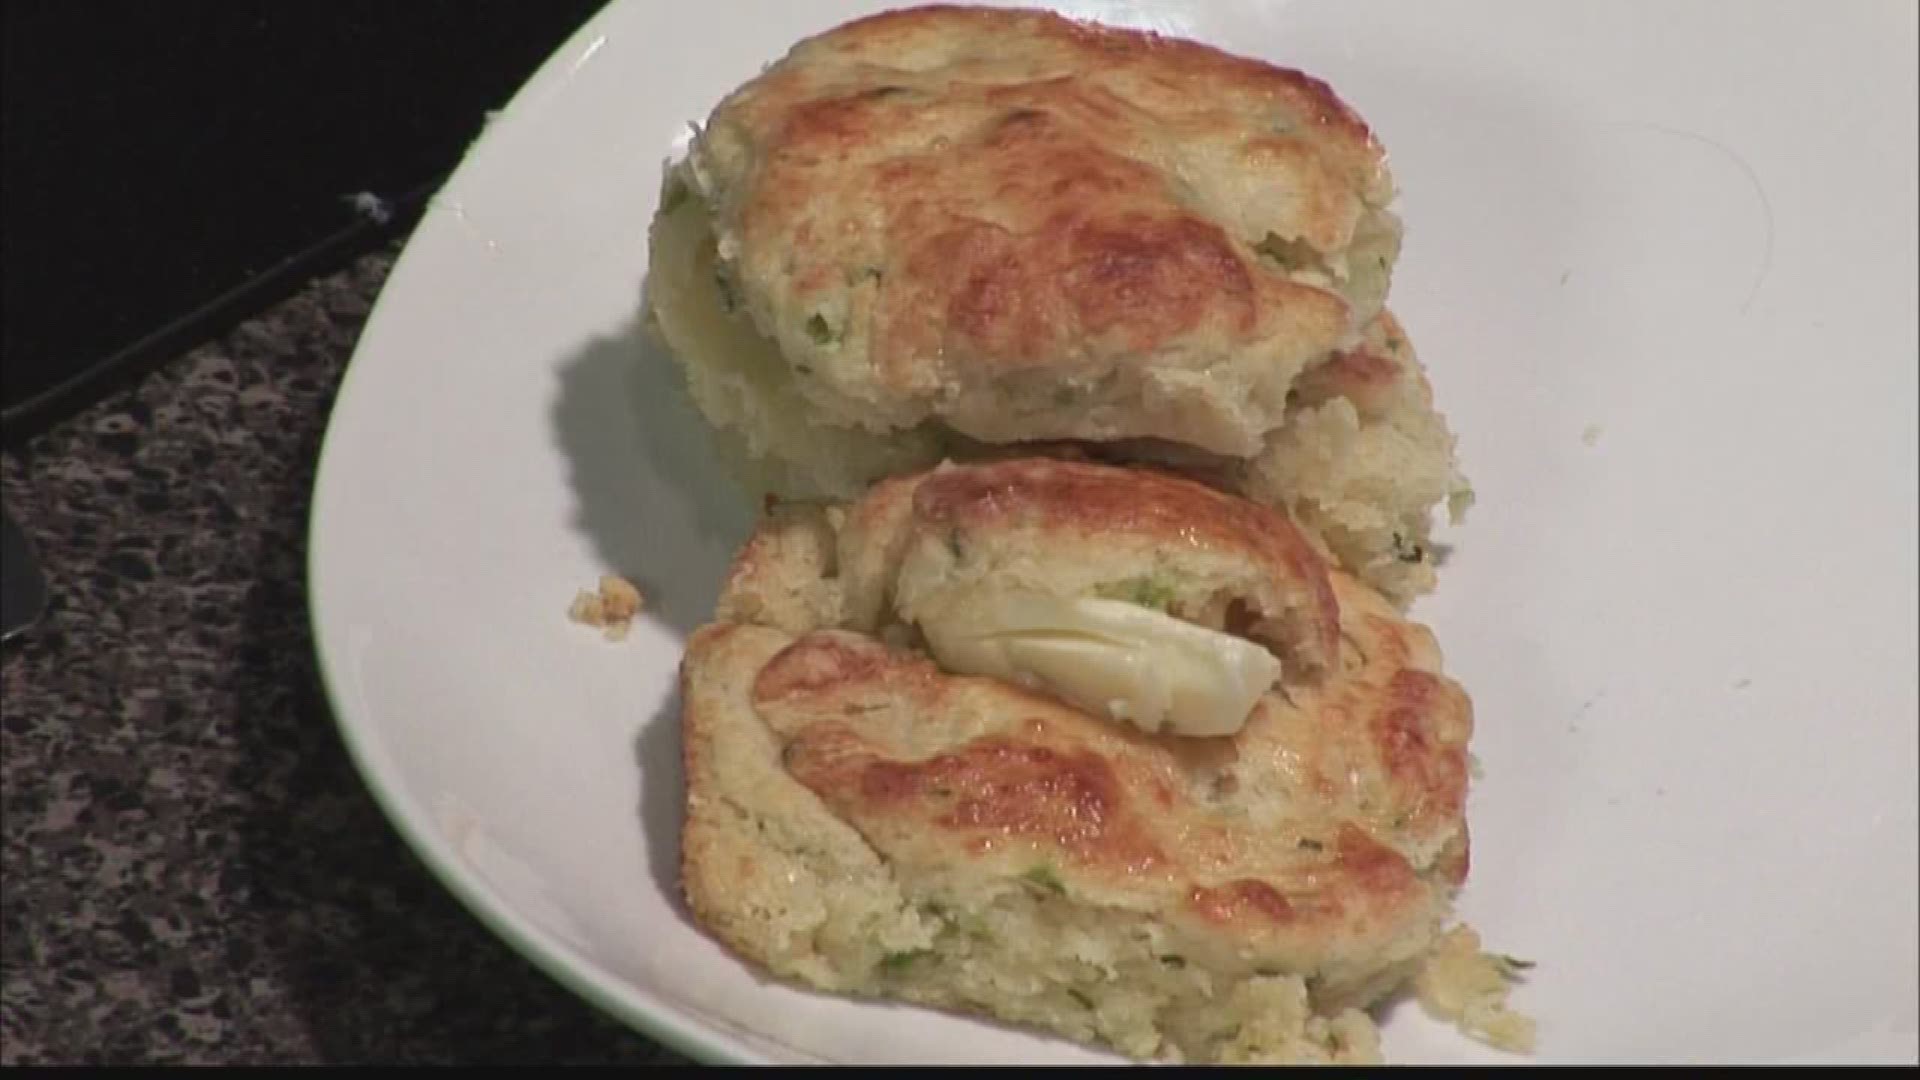 Buttermilk biscuits with cheddar and jalapenos?!?!? PLEASE AND THANK YOU!